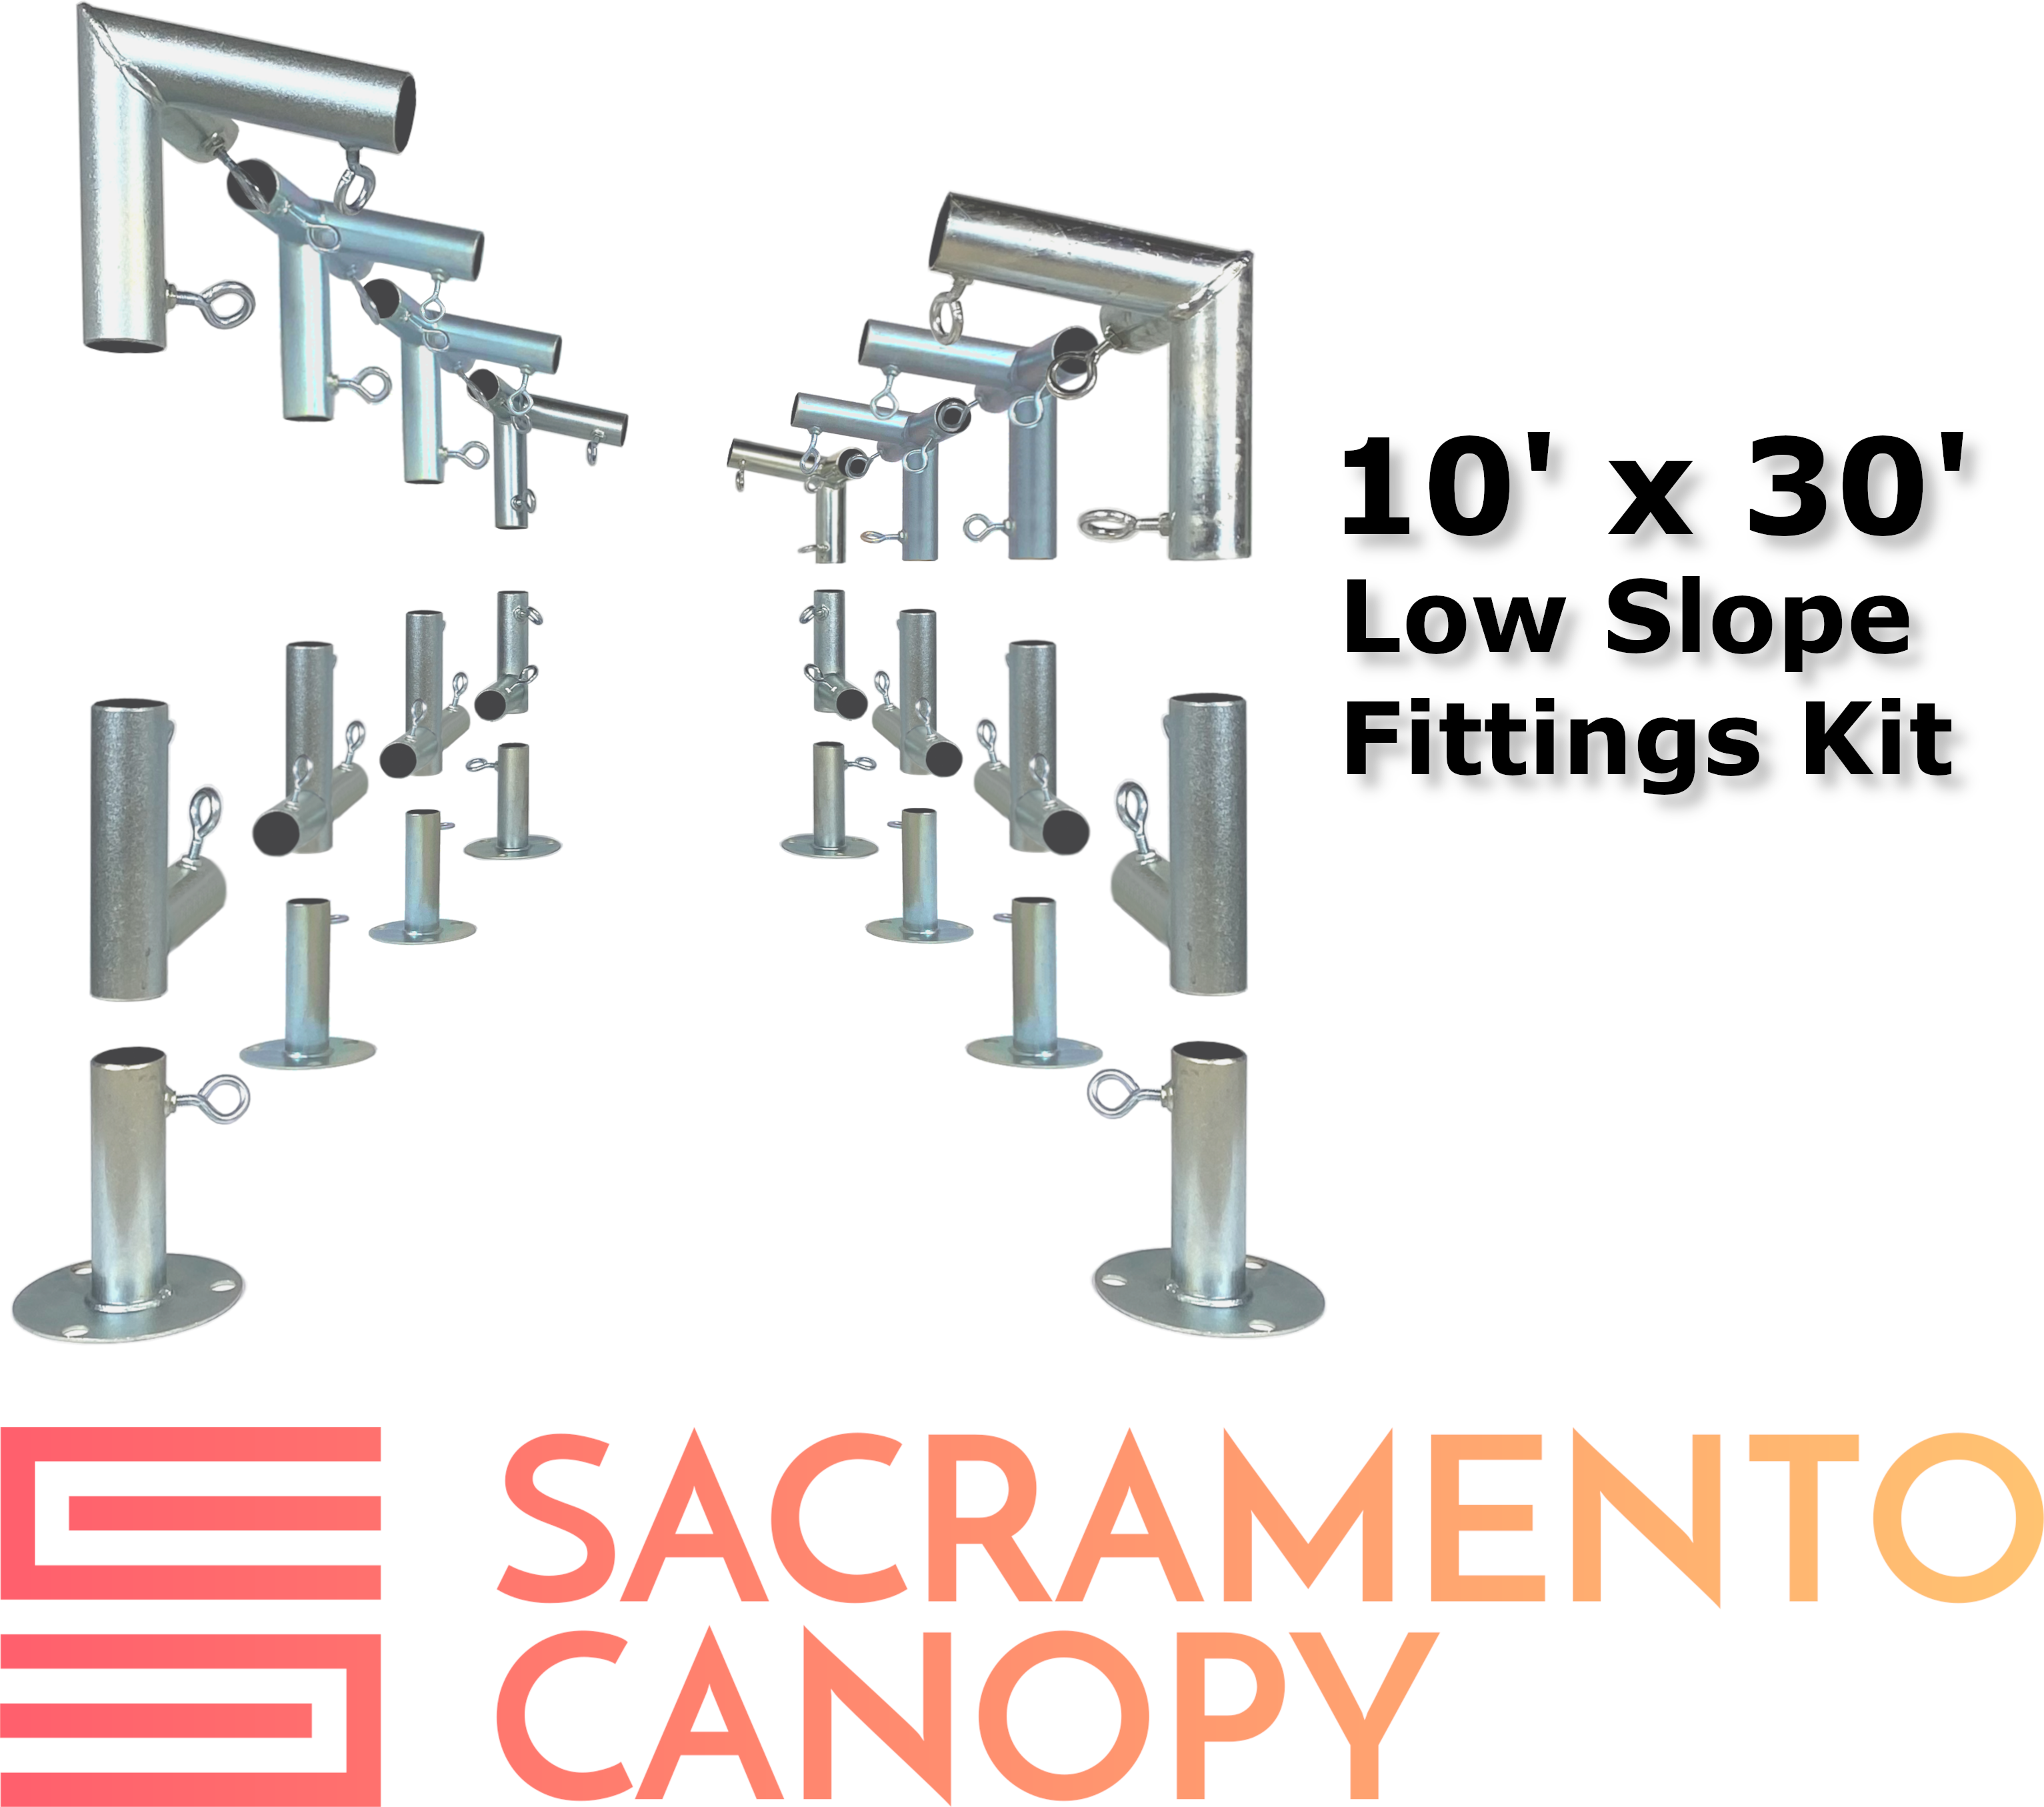 Slope Roof Canopy Fittings Kits (10' Wide) DIY Greenhouse, RV & Boat Carport, Shelter, Shade Structure, Vendor Booth, Tent, Steel Frame EMT Connector Parts, 1" - image 1 of 22